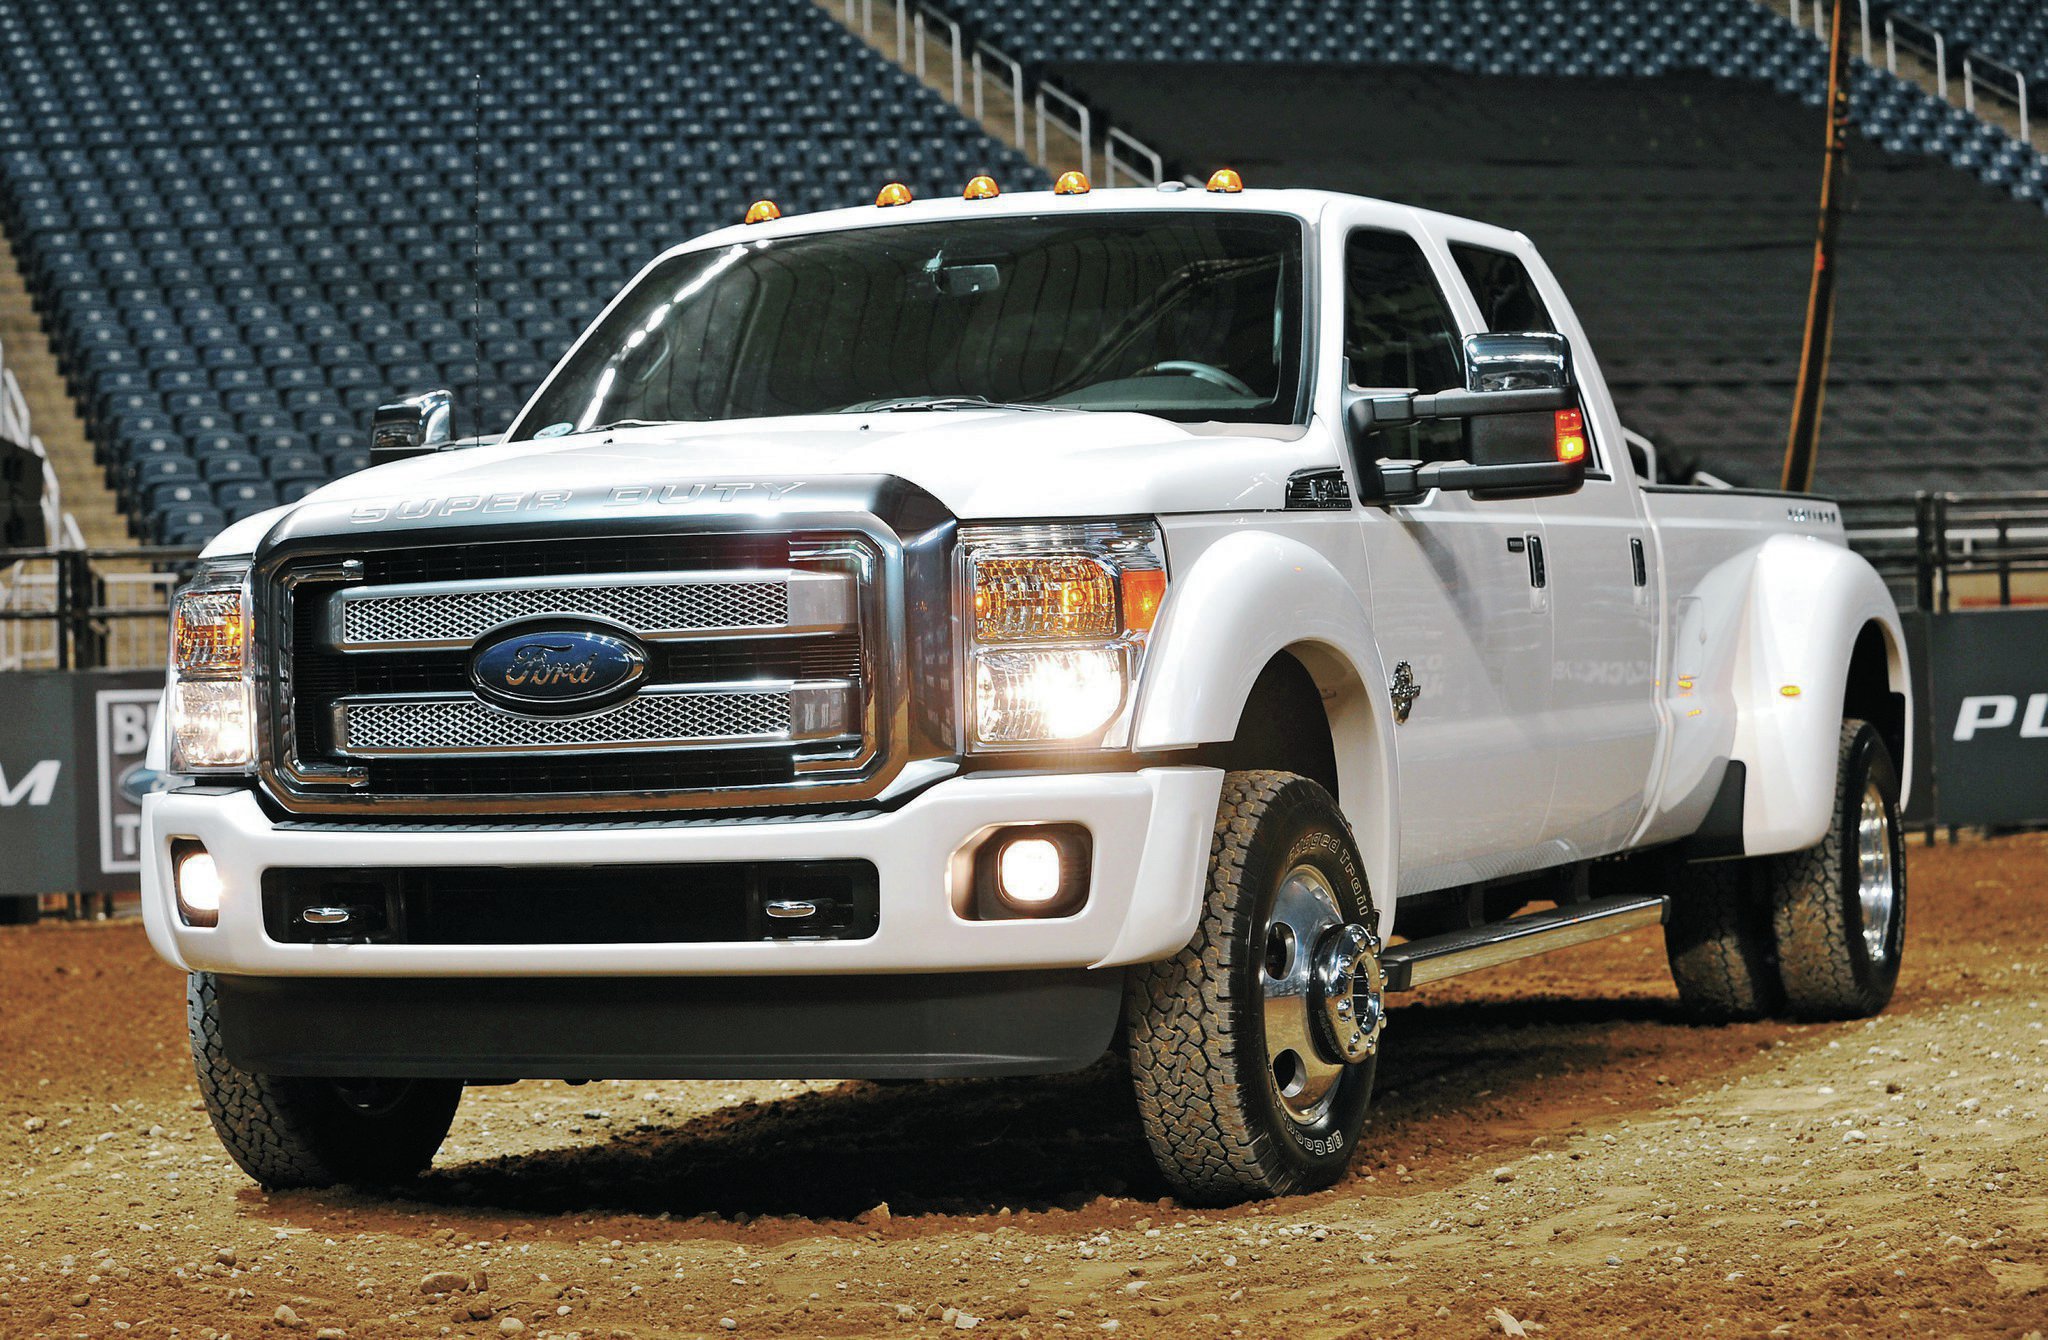 Ford F-350 Backgrounds, Compatible - PC, Mobile, Gadgets| 2048x1340 px